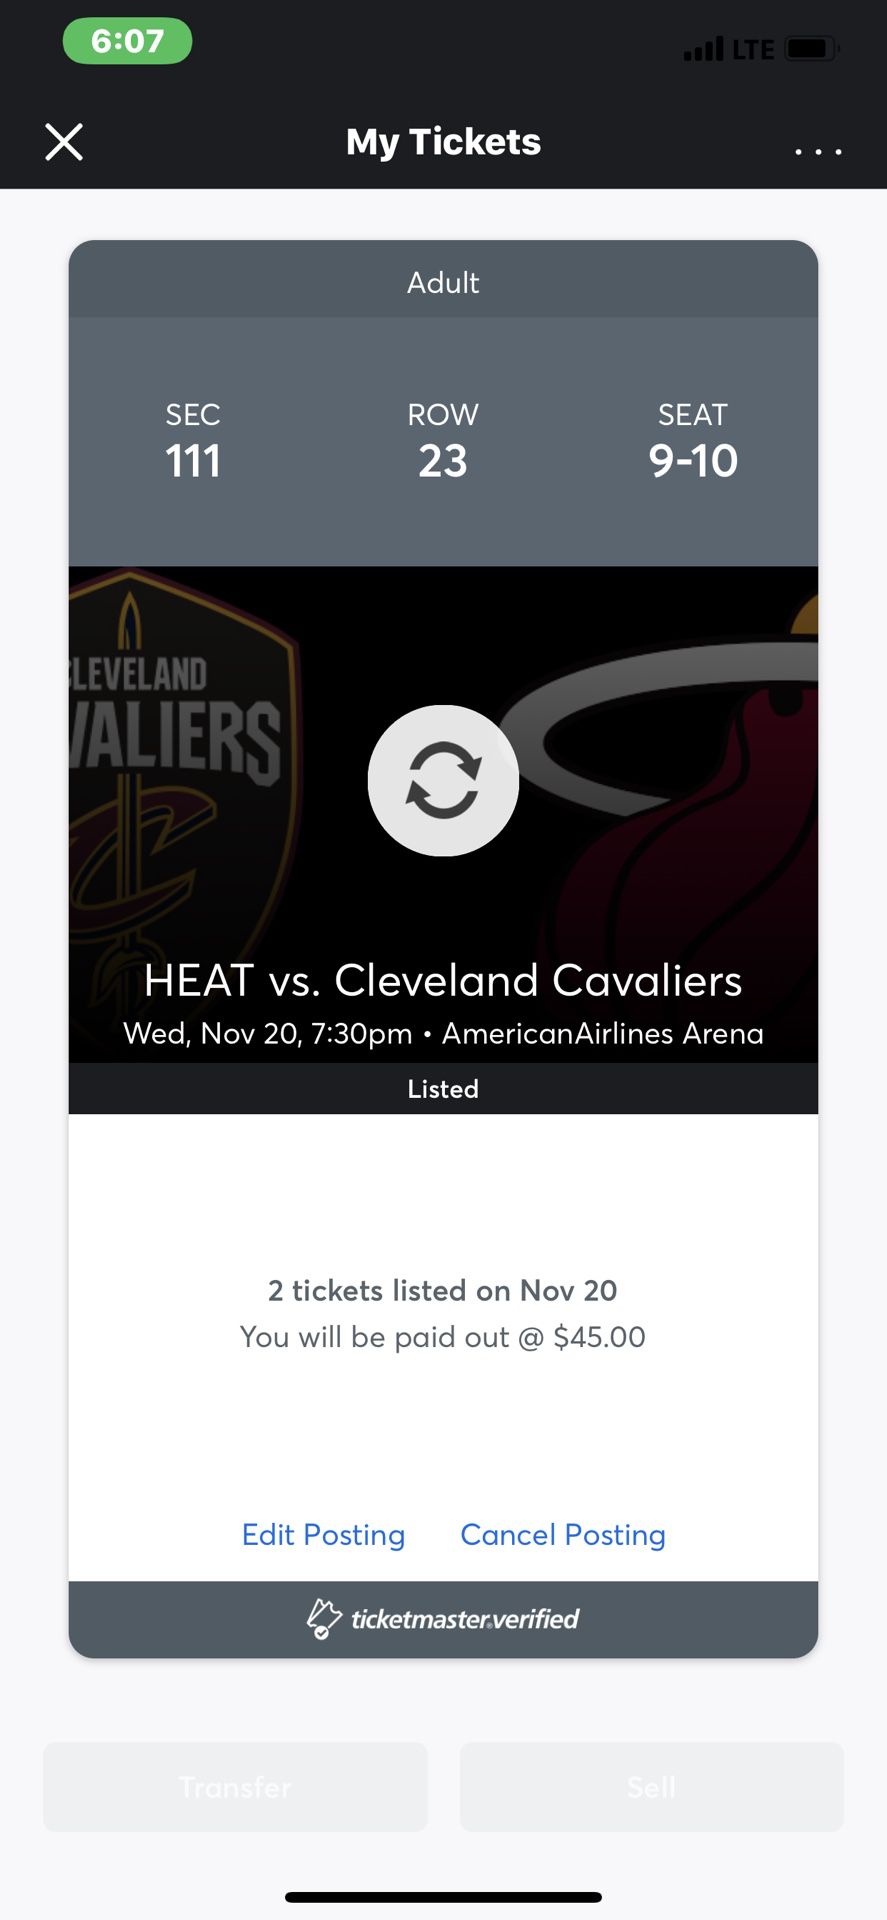 2 Heat Tickets for today cleavland Cavaliers